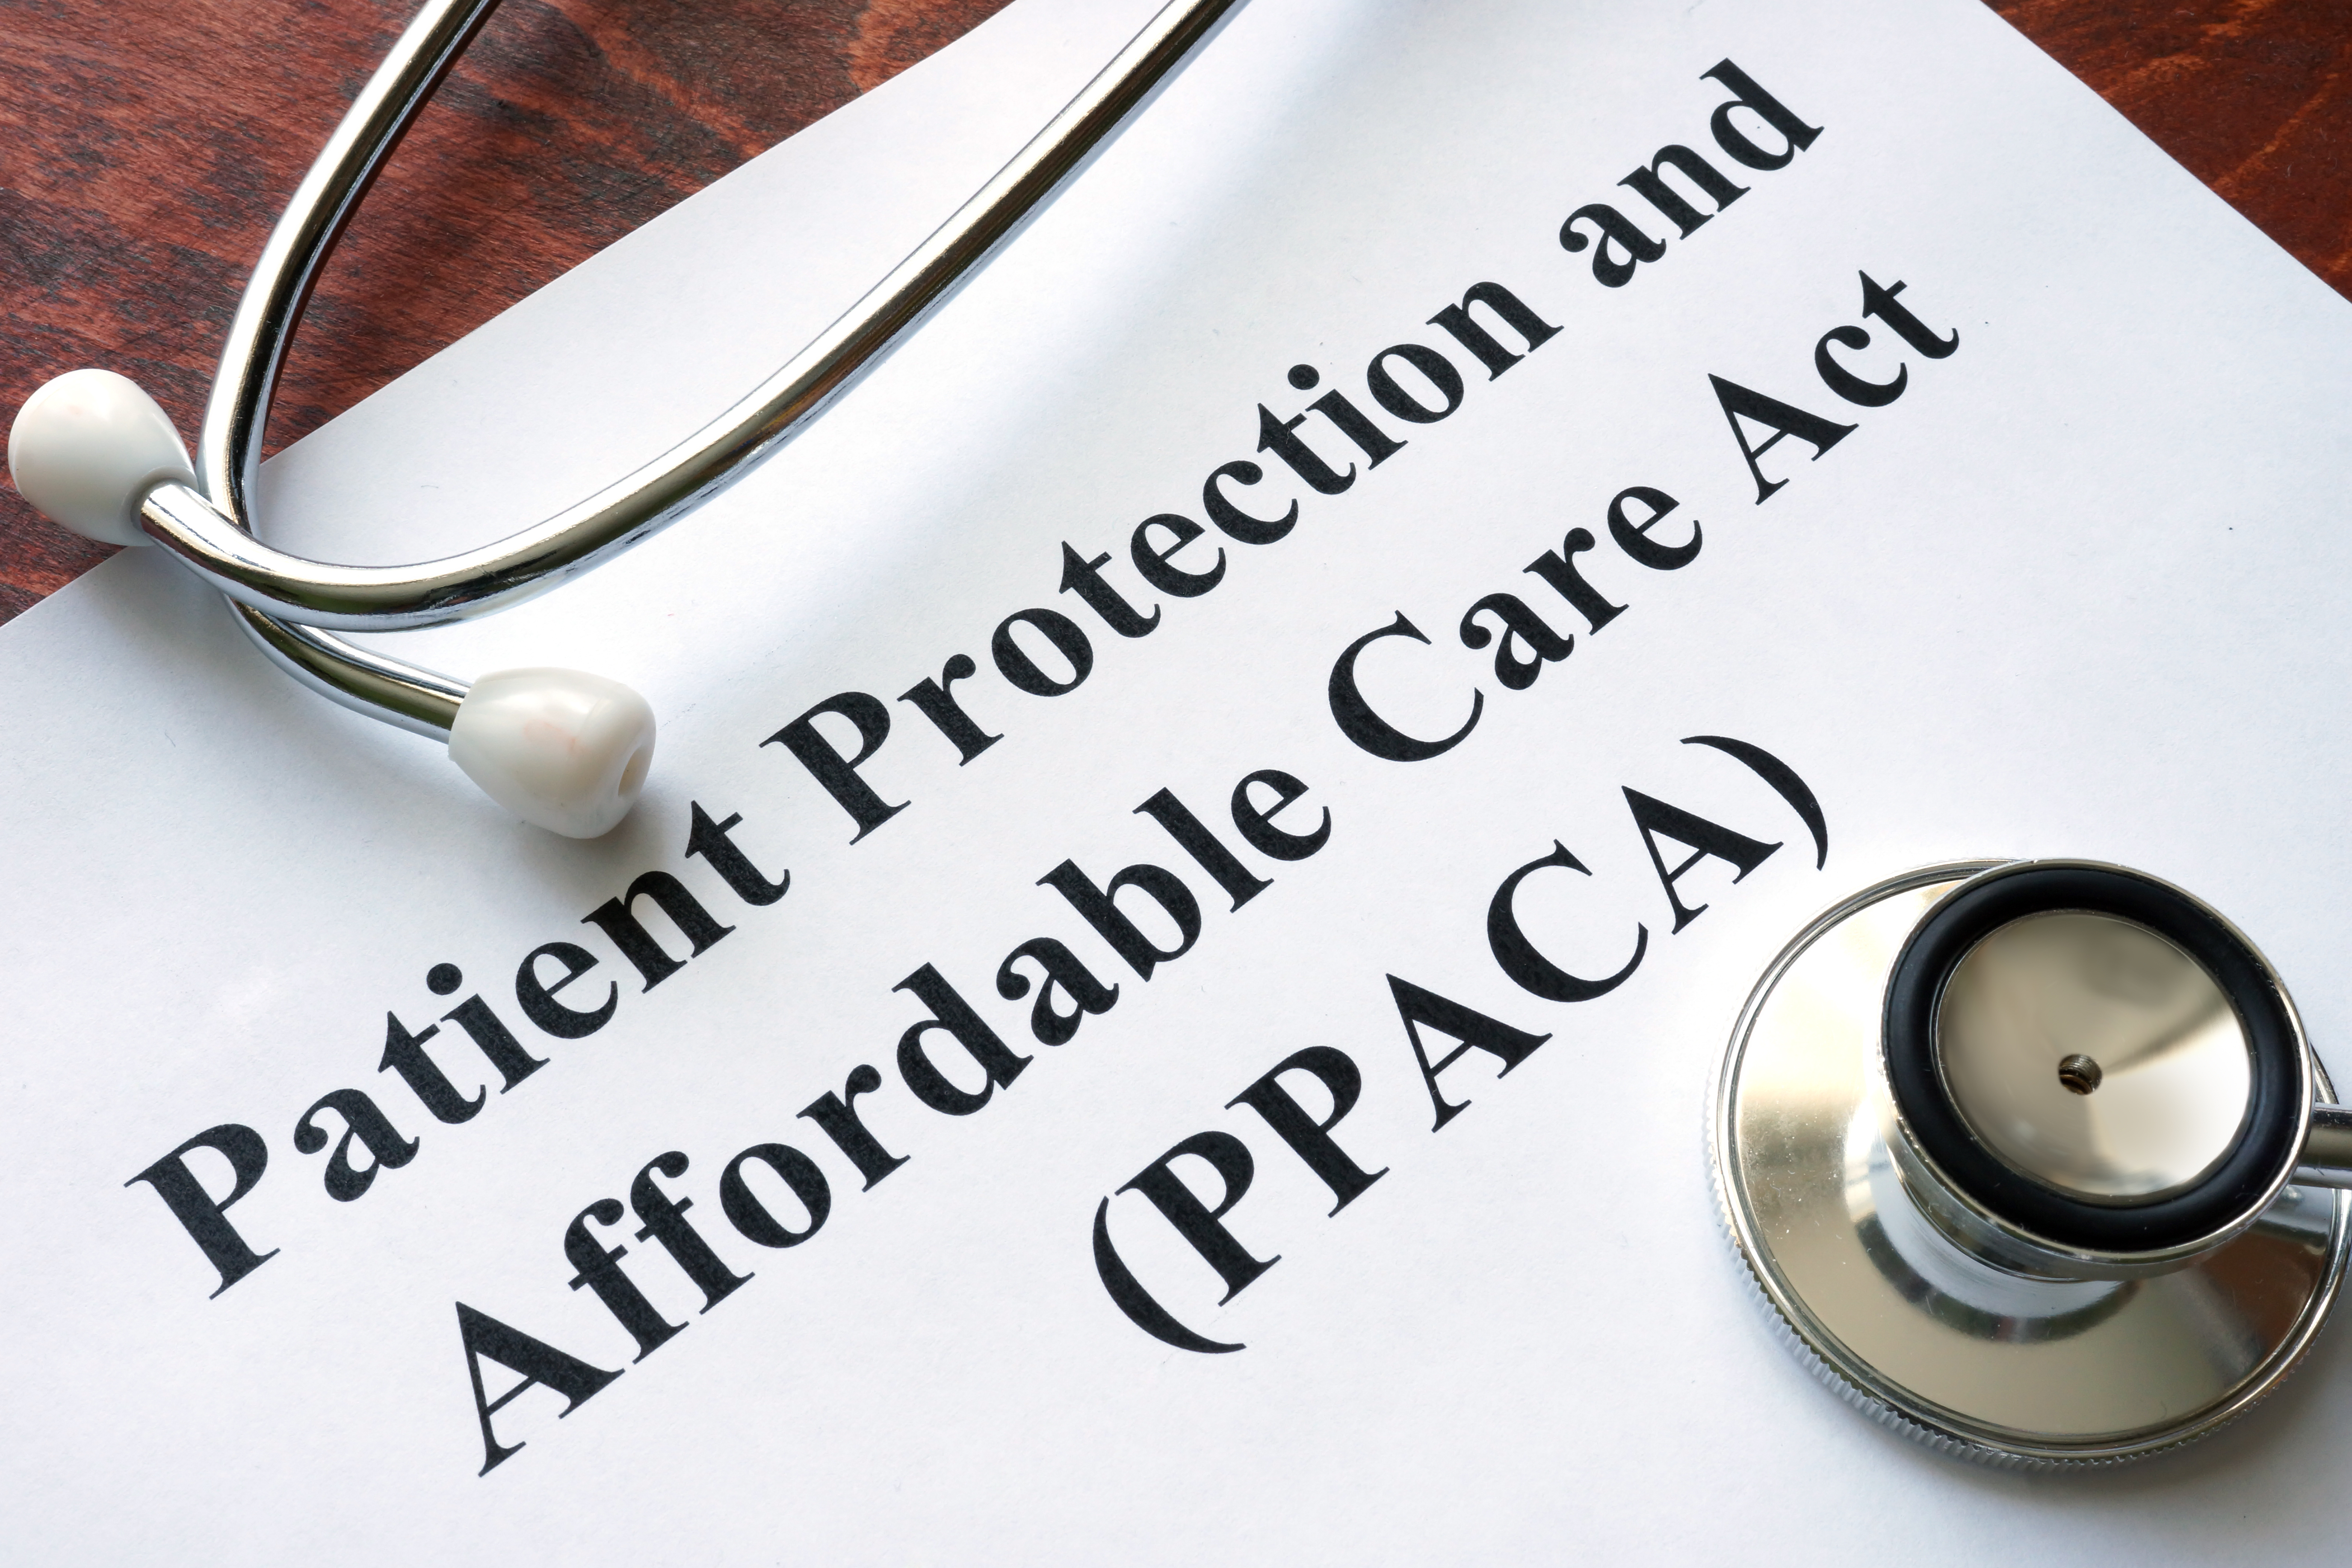 Document titled Patient Protection and Affordable Care Act